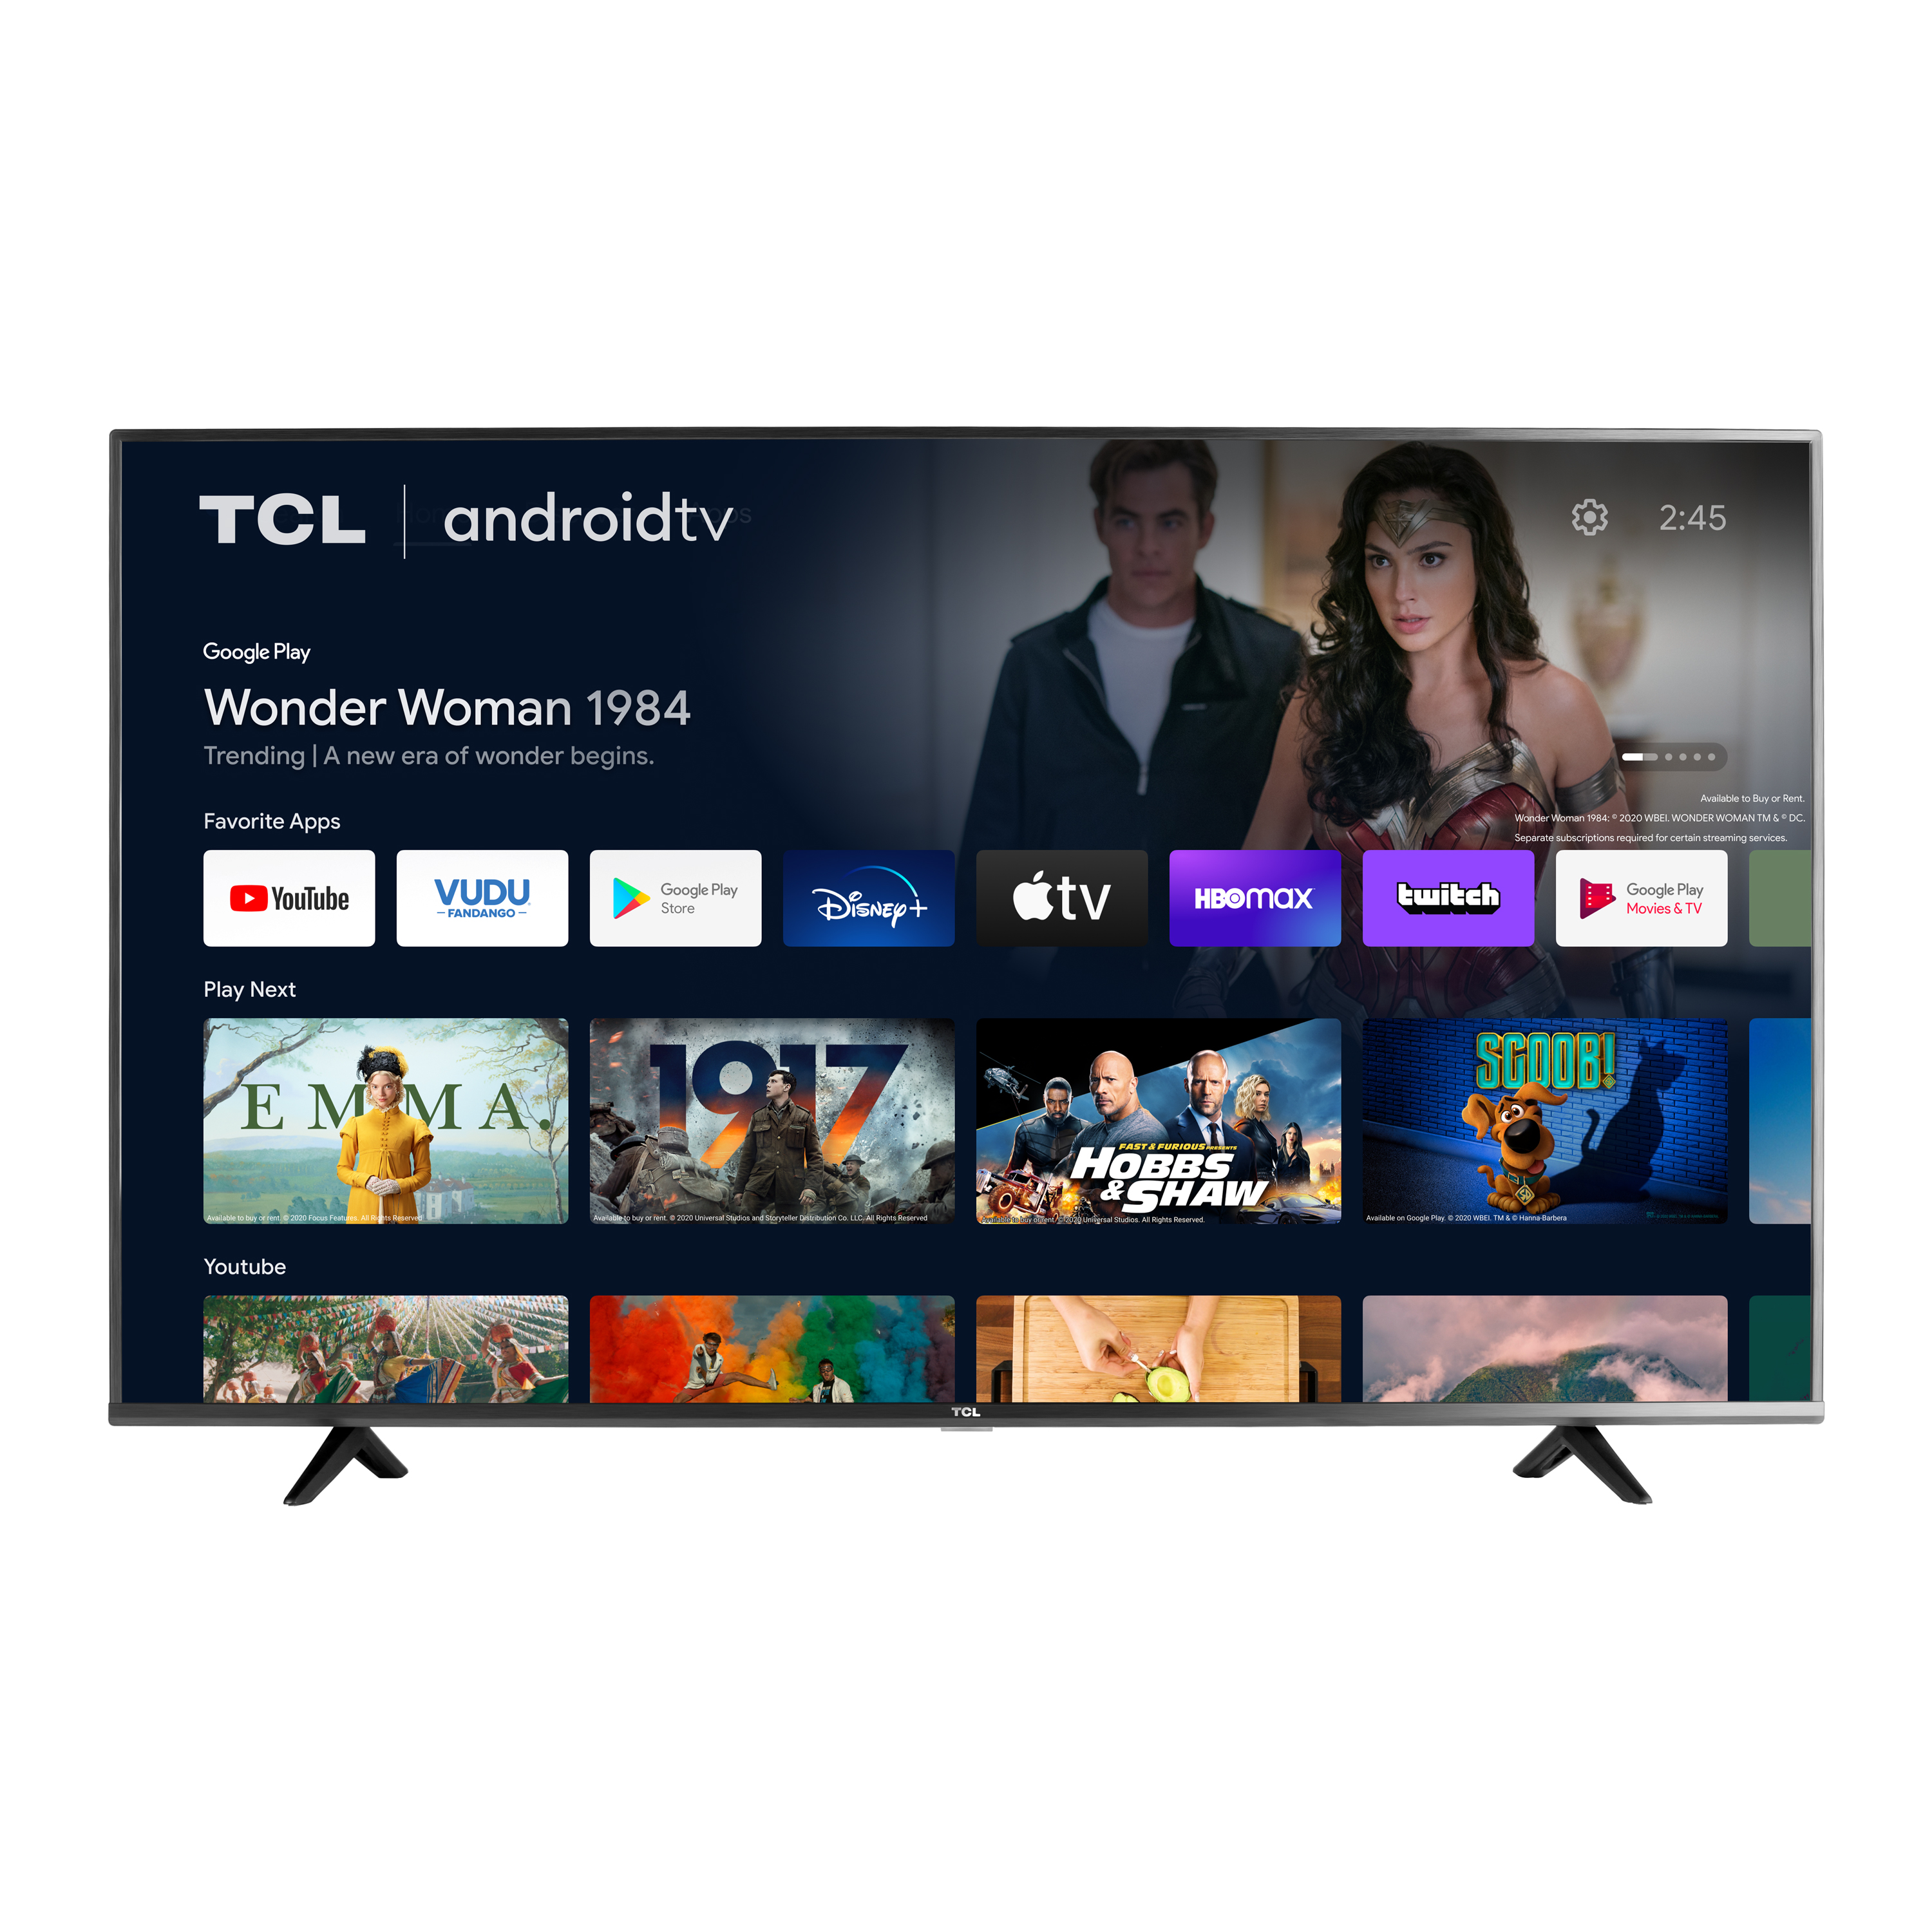 TCL 55" Class 4-Series 4K UHD HDR Smart Android TV - 55S434 - image 1 of 11